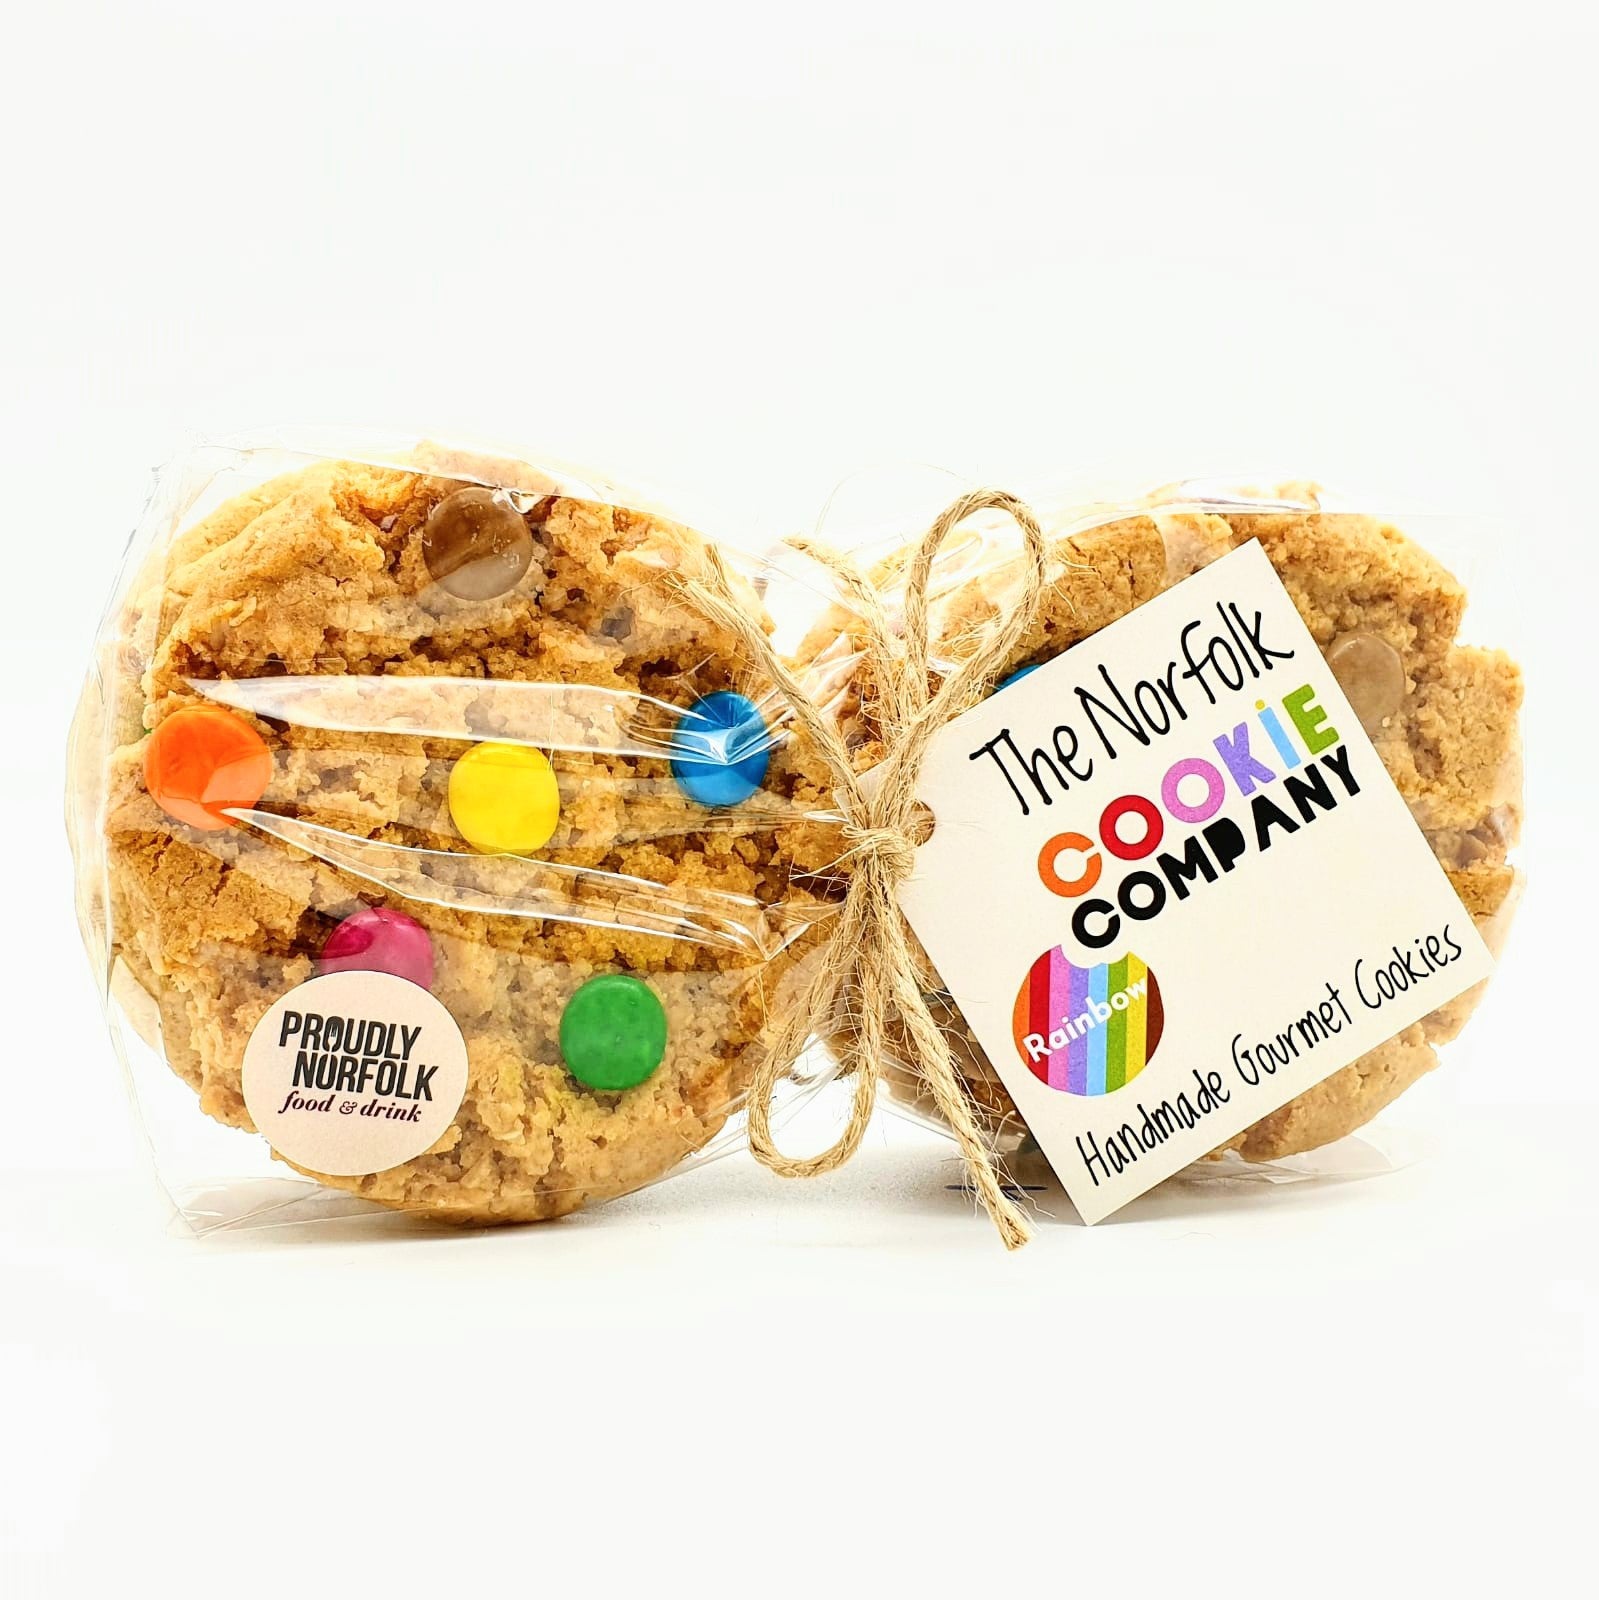 Norfolk Cookie Co. Rainbow Smartie Cookies - Limited Edition!